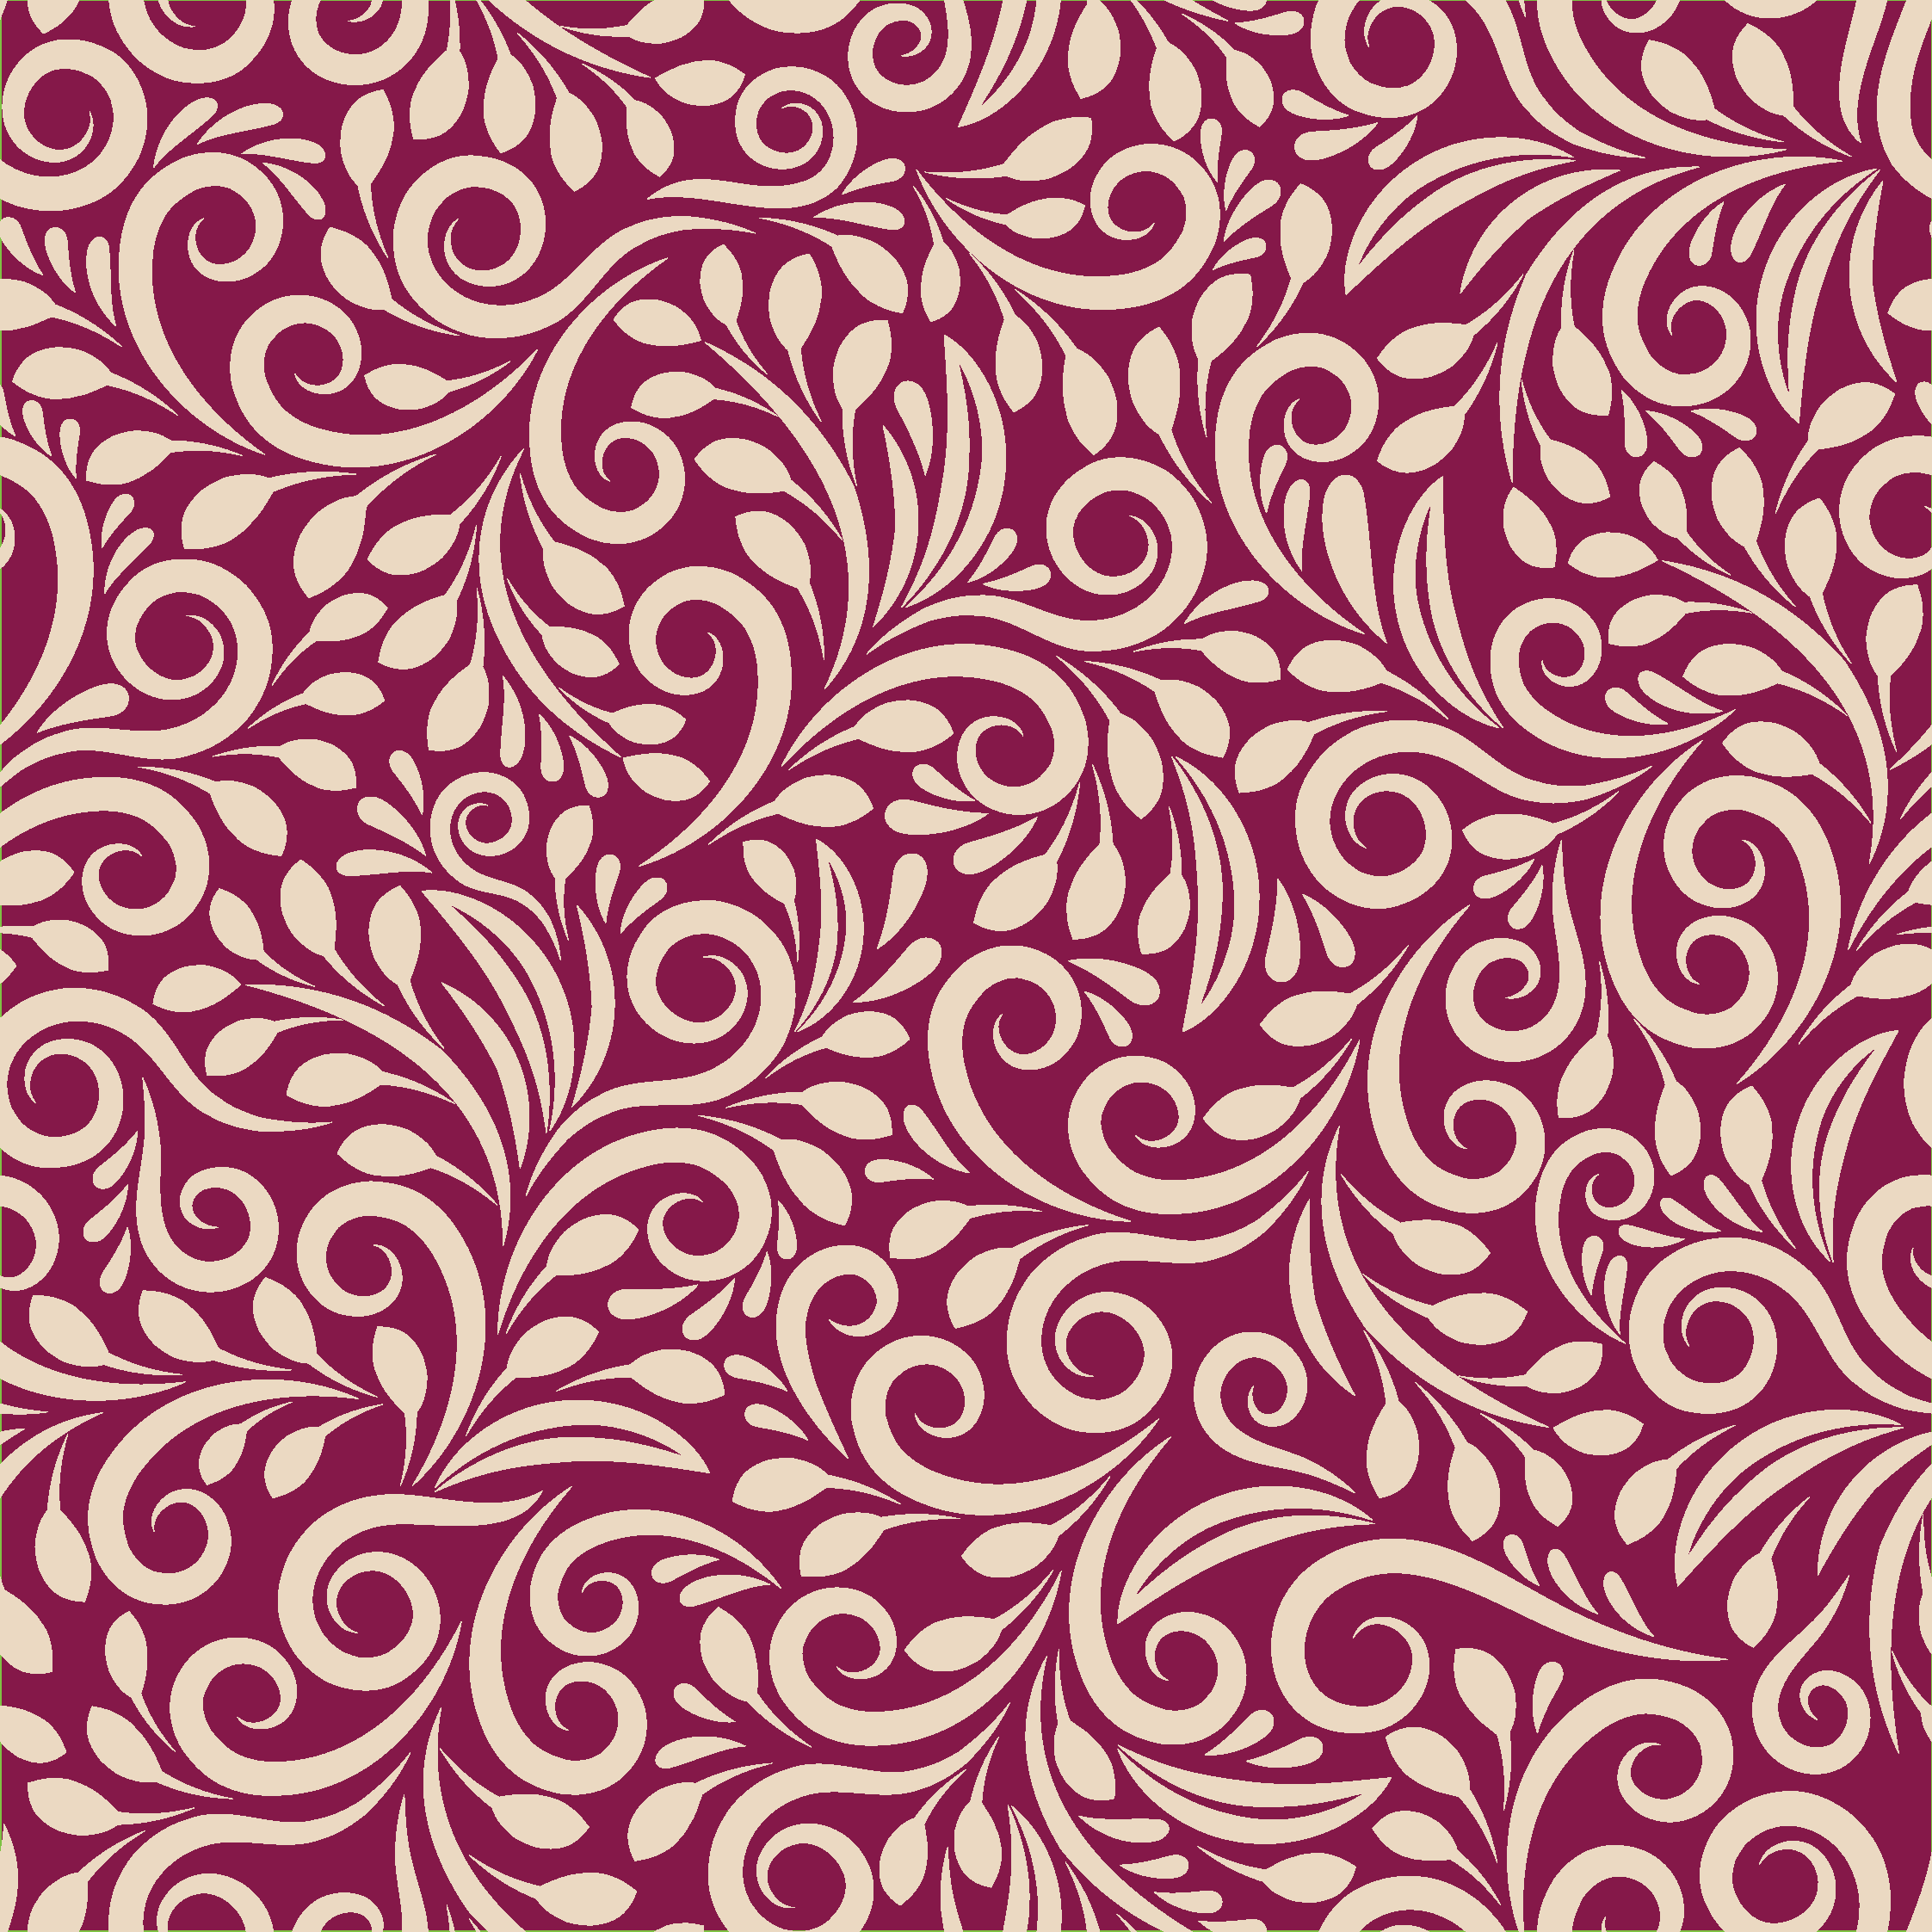 NEW FLORAL PATTERN DESING FOR BACKGROUNDS AND ARTS preview image.